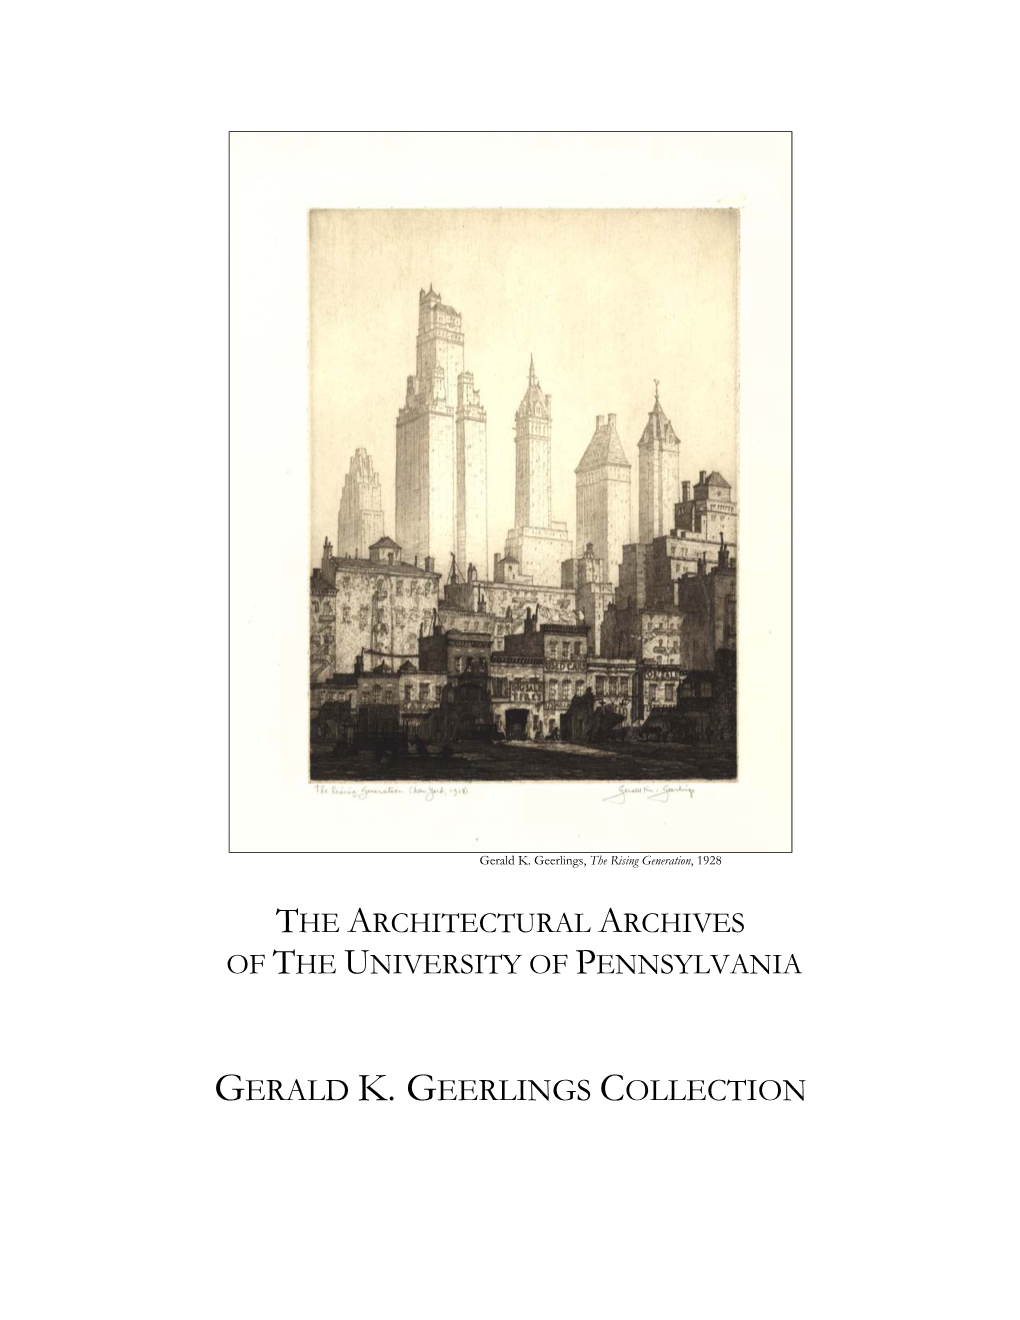 Gerald Kenneth Geerlings, 1897-1998: a Finding Aid for Drawings